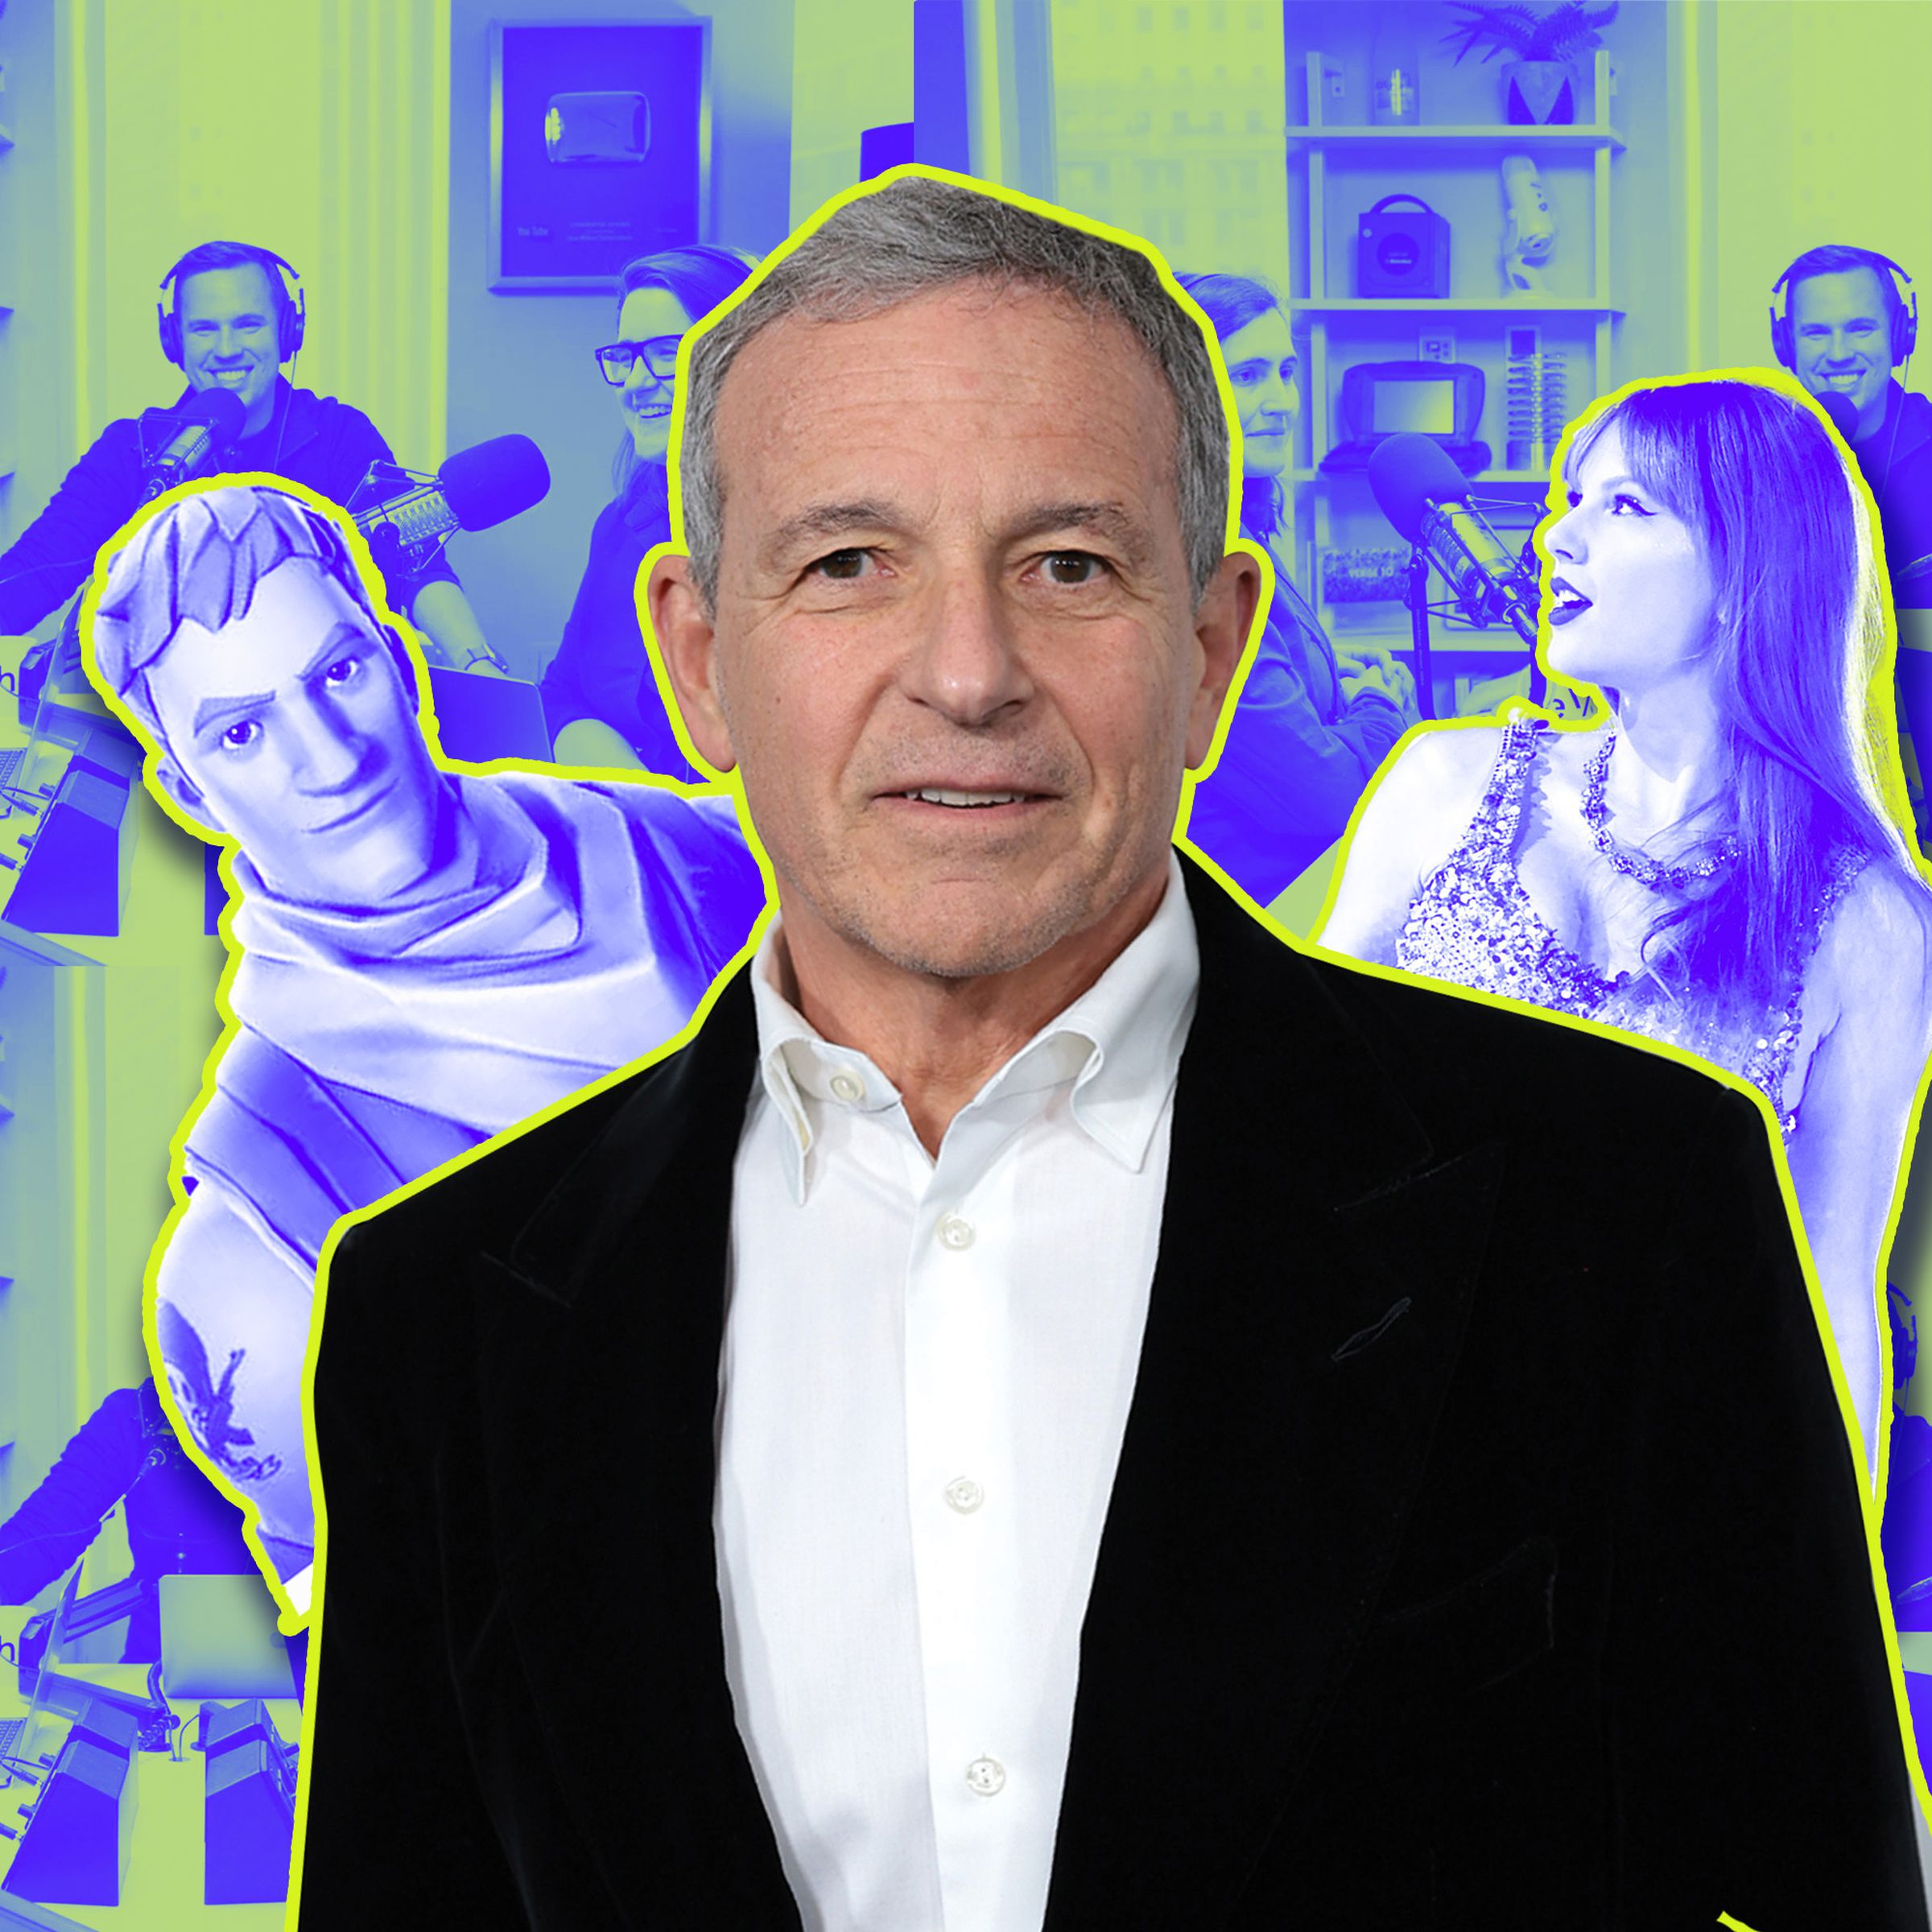 An image of Bob Iger on top of a screenshot from The Vergecast.